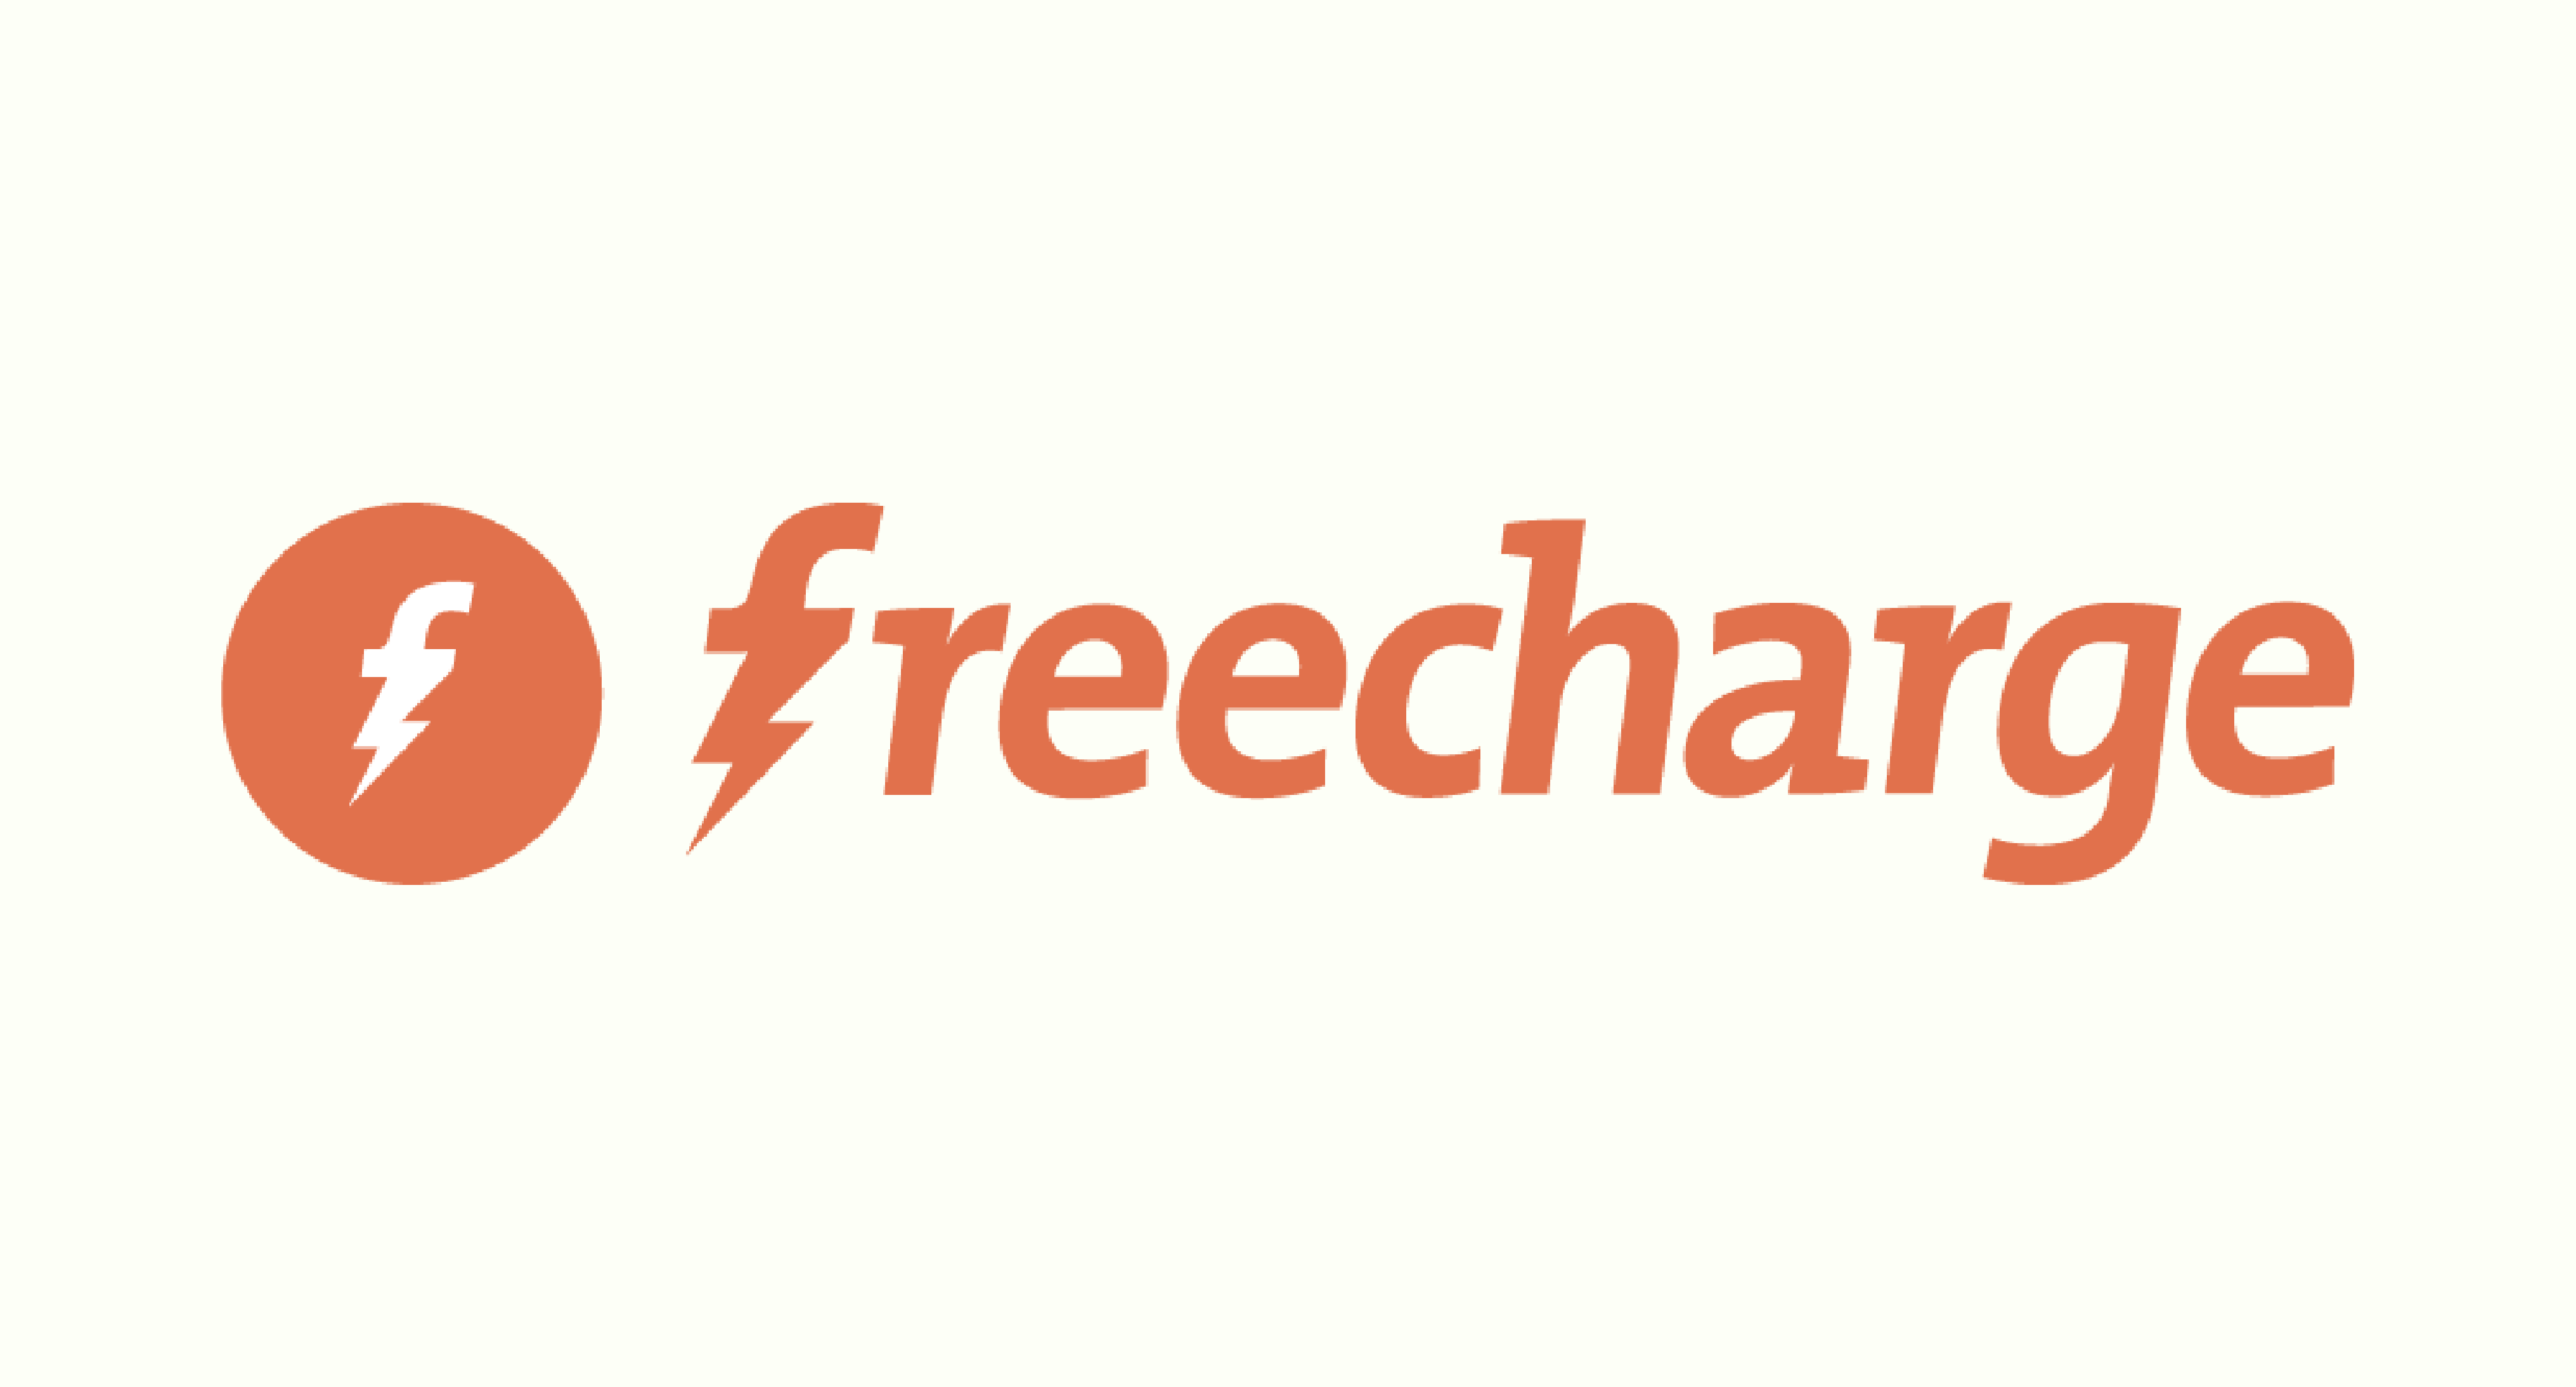 Axis Bank Buys Freecharge to Boost Digital Payments